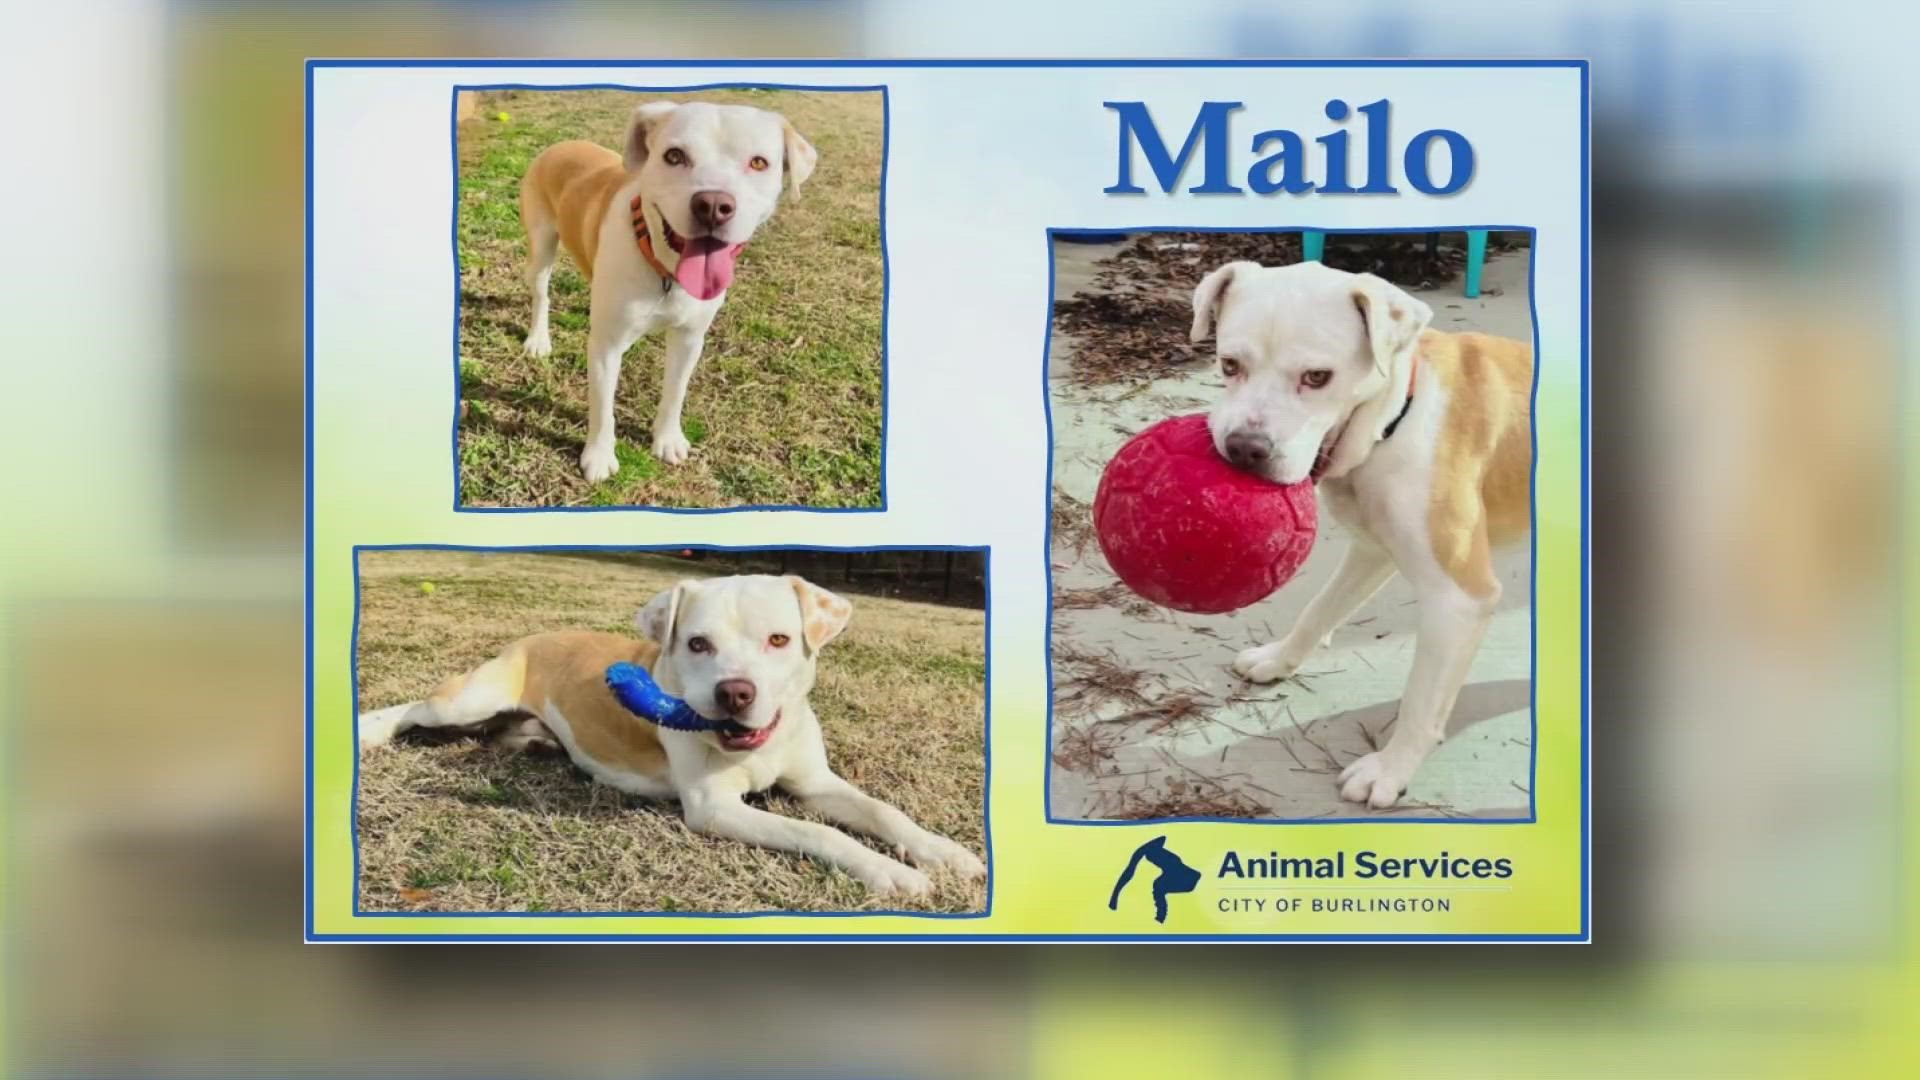 Let’s get Mailo adopted!